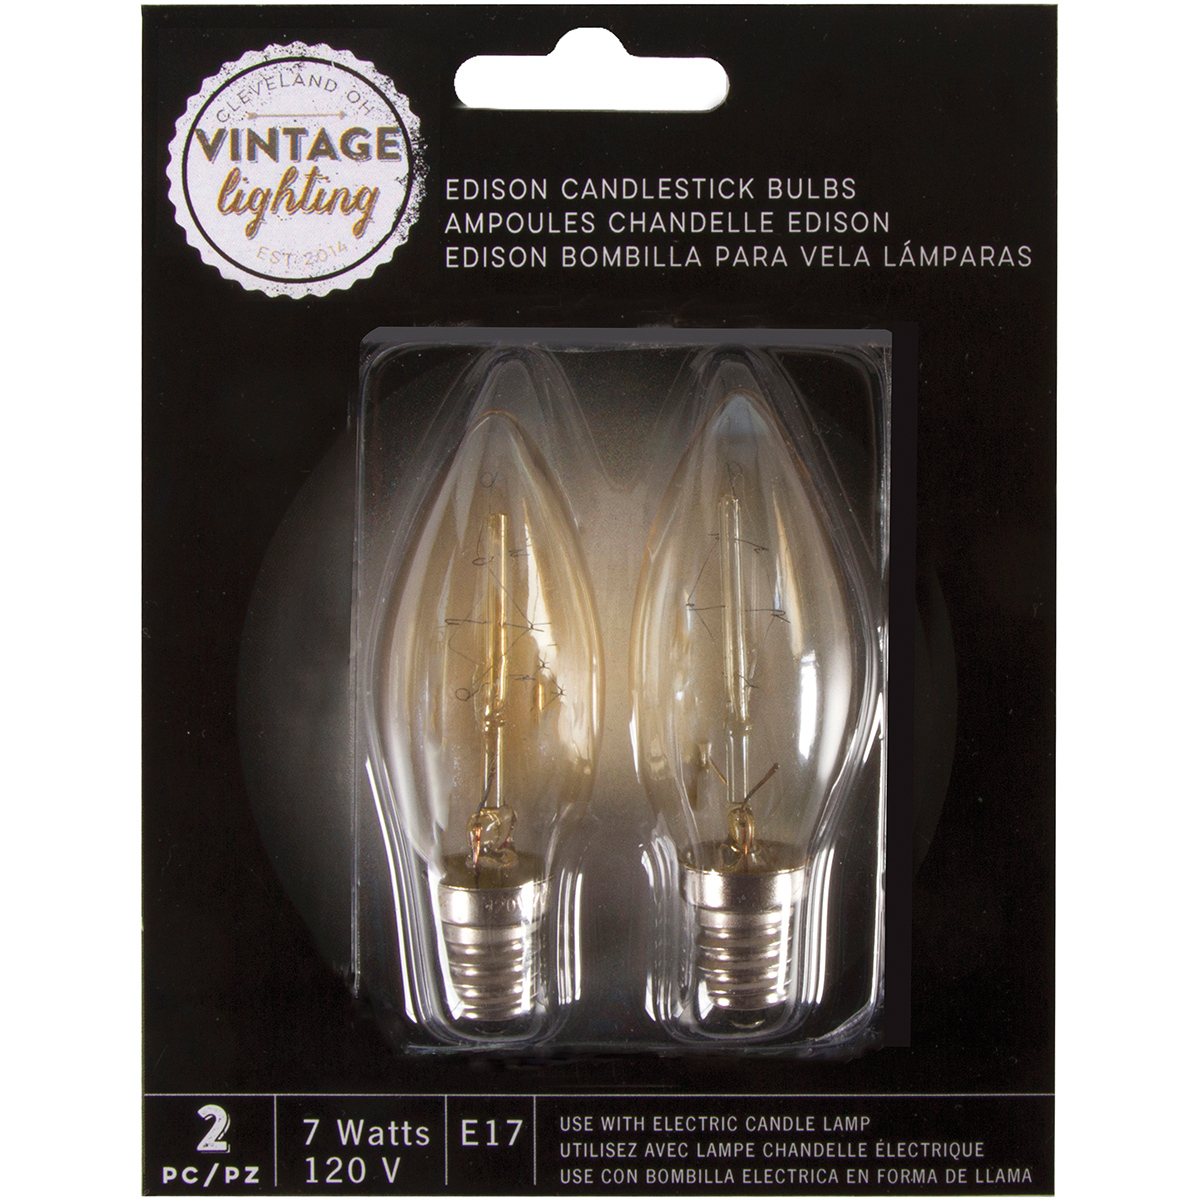 Edison Candlestick Bulbs 7 Watts - Picture 1 of 1